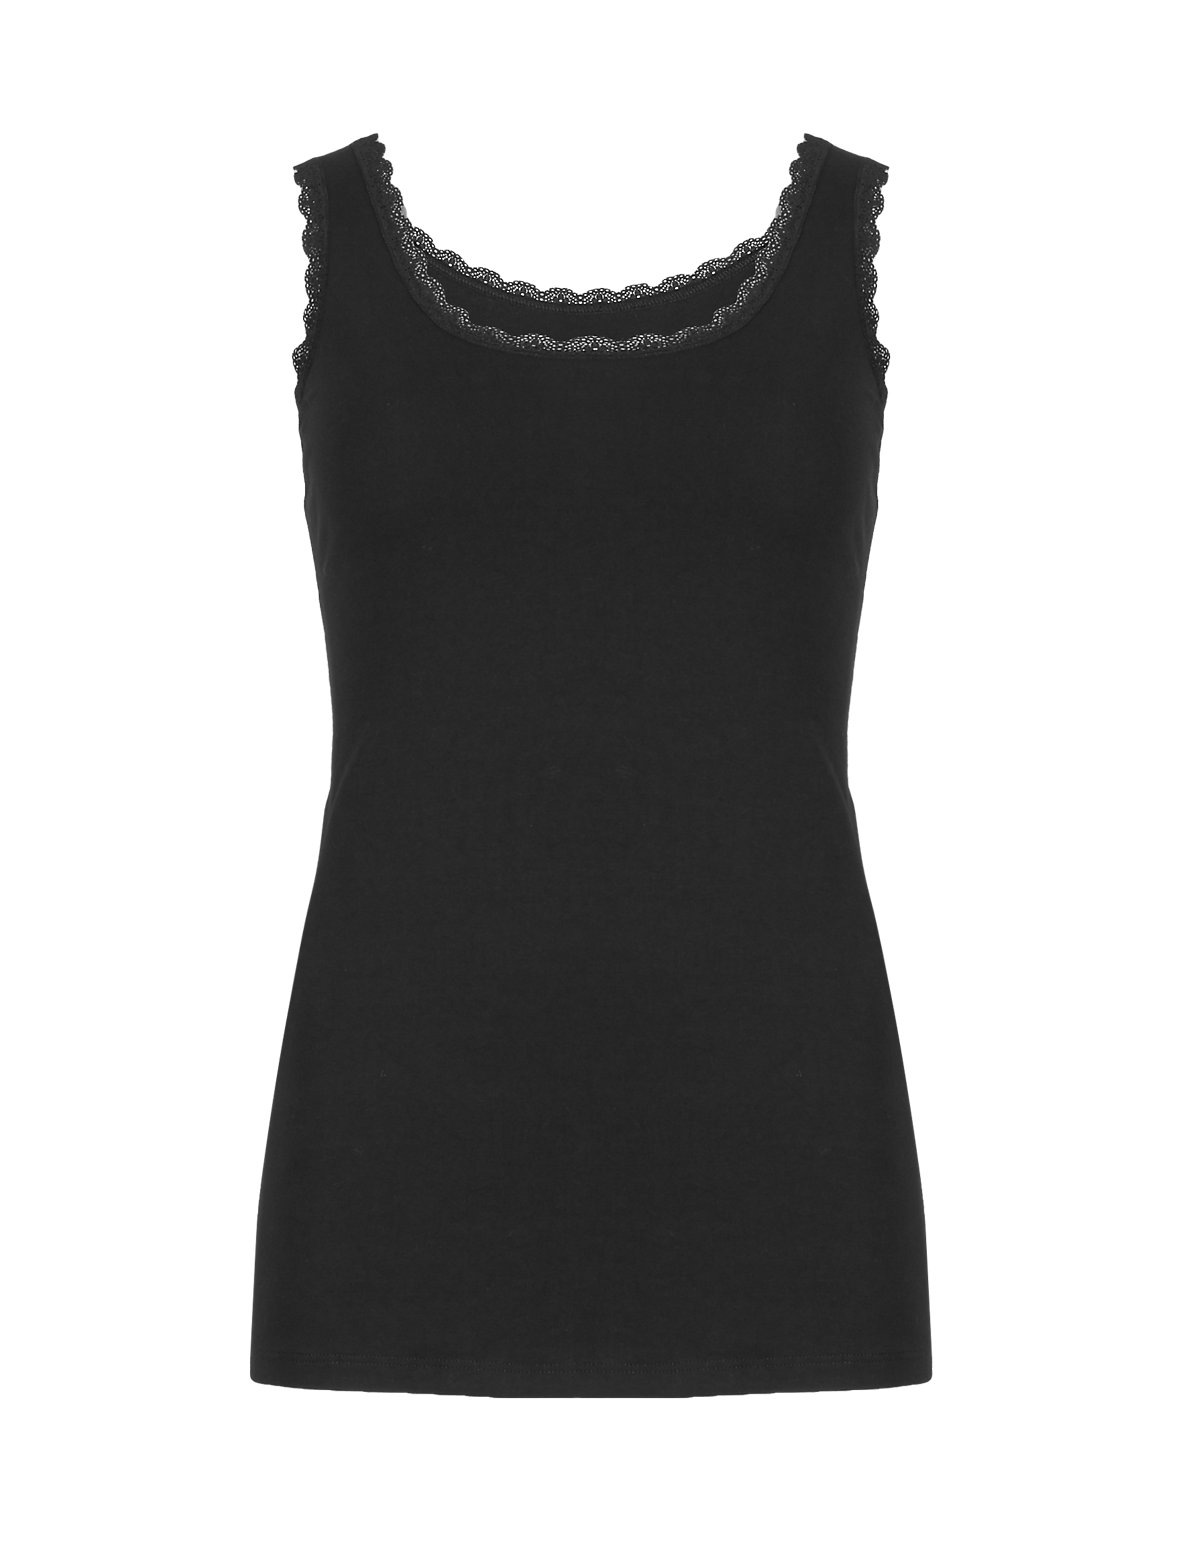 Marks and Spencer - - M&5 BLACK Cotton Rich Lace Trim Vest - Size 6 to 20